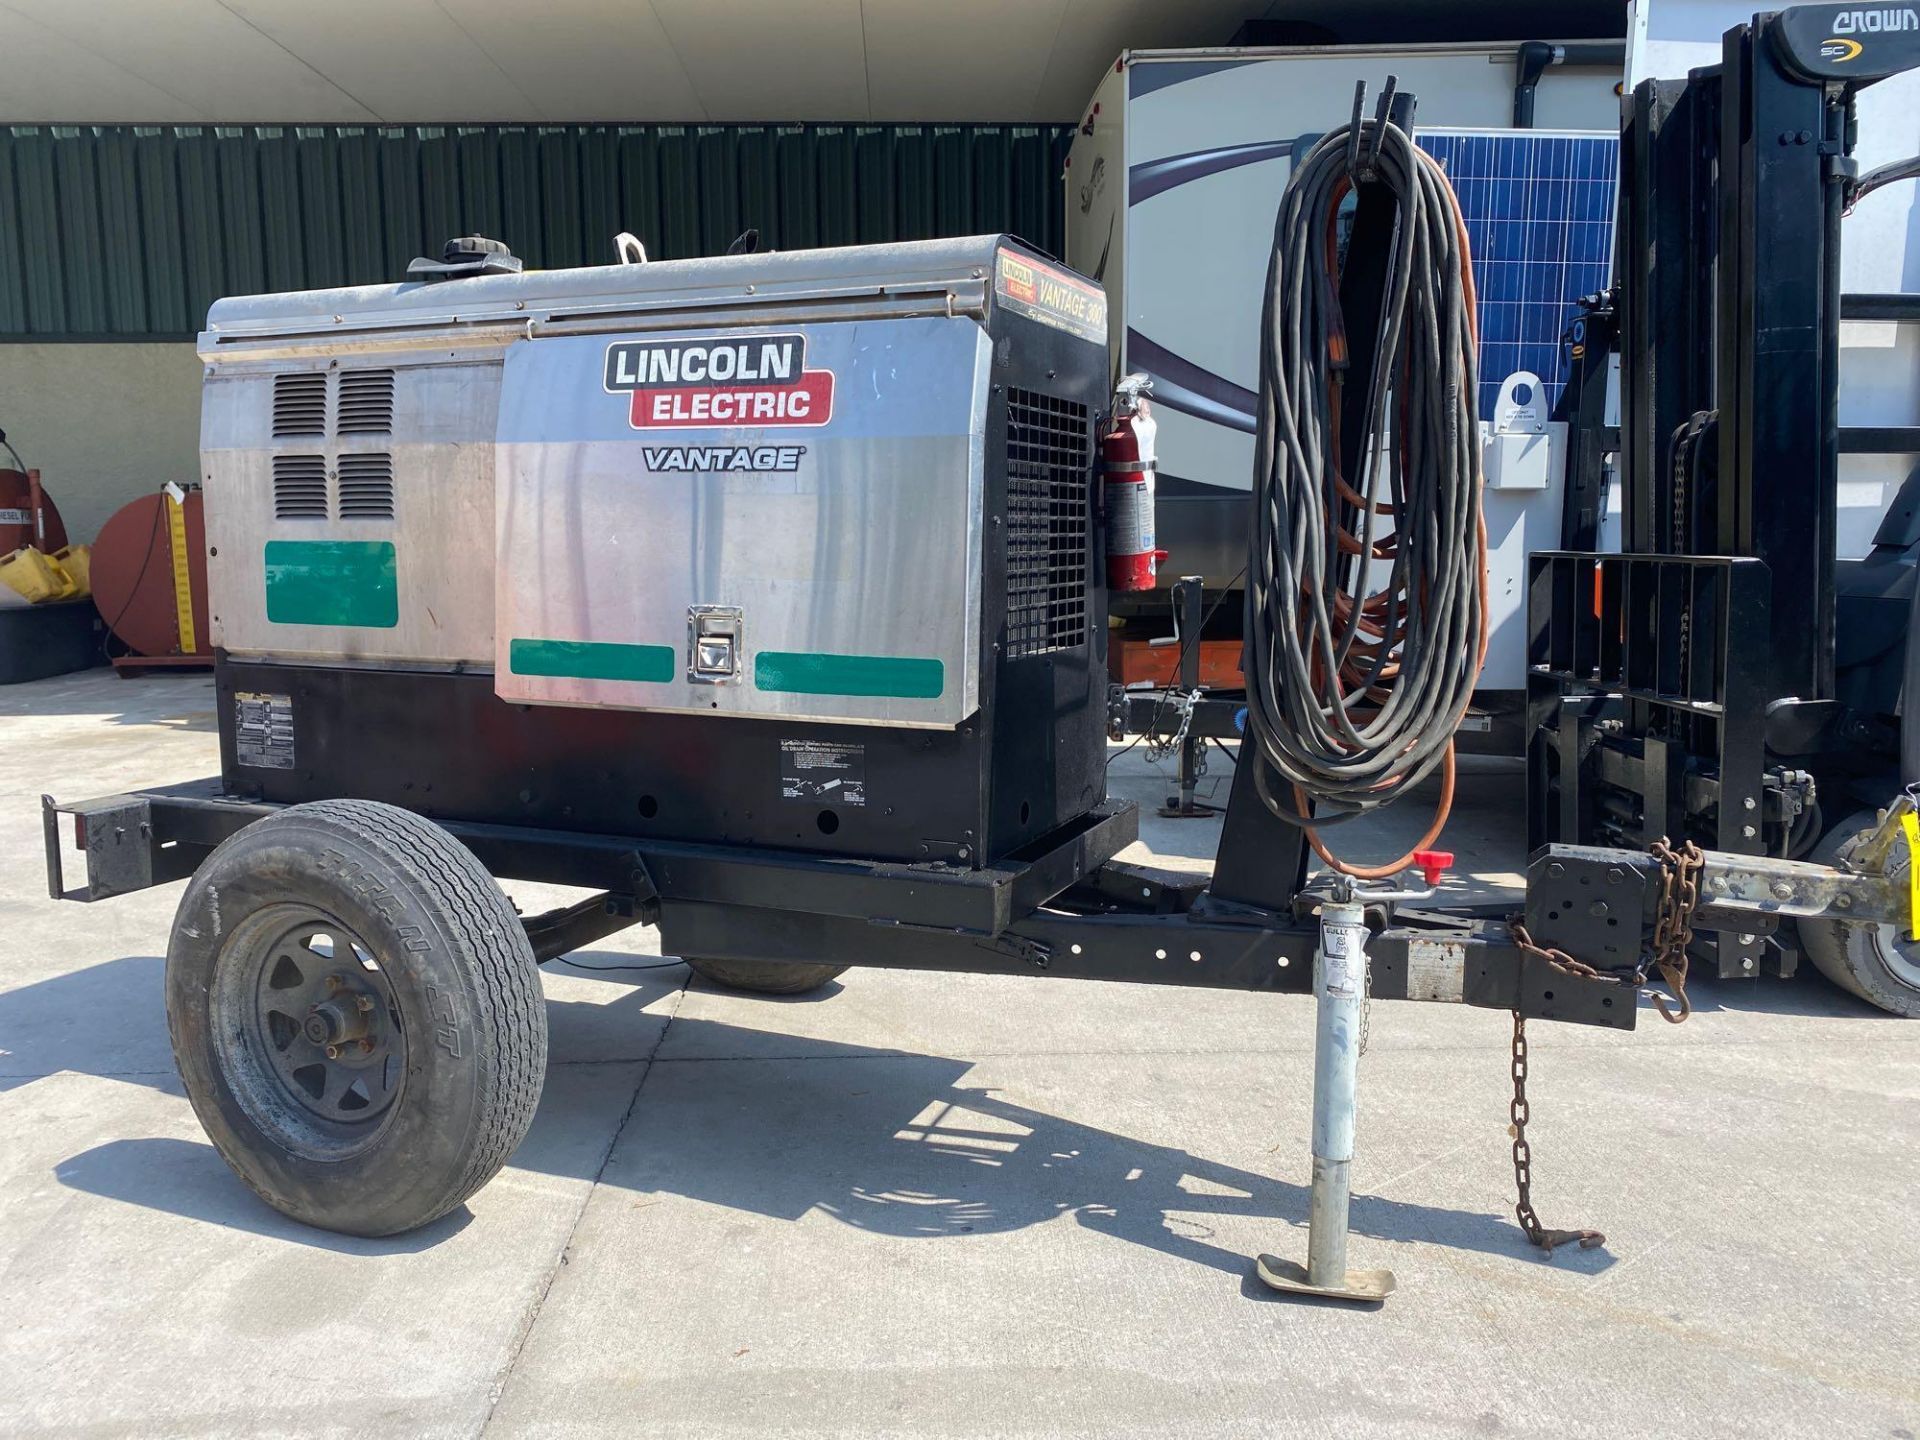 LINCOLN ELECTRIC VANTAGE 300 WELDER, TRAILER MOUNTED, RUNS AND OPERATES - Image 2 of 14